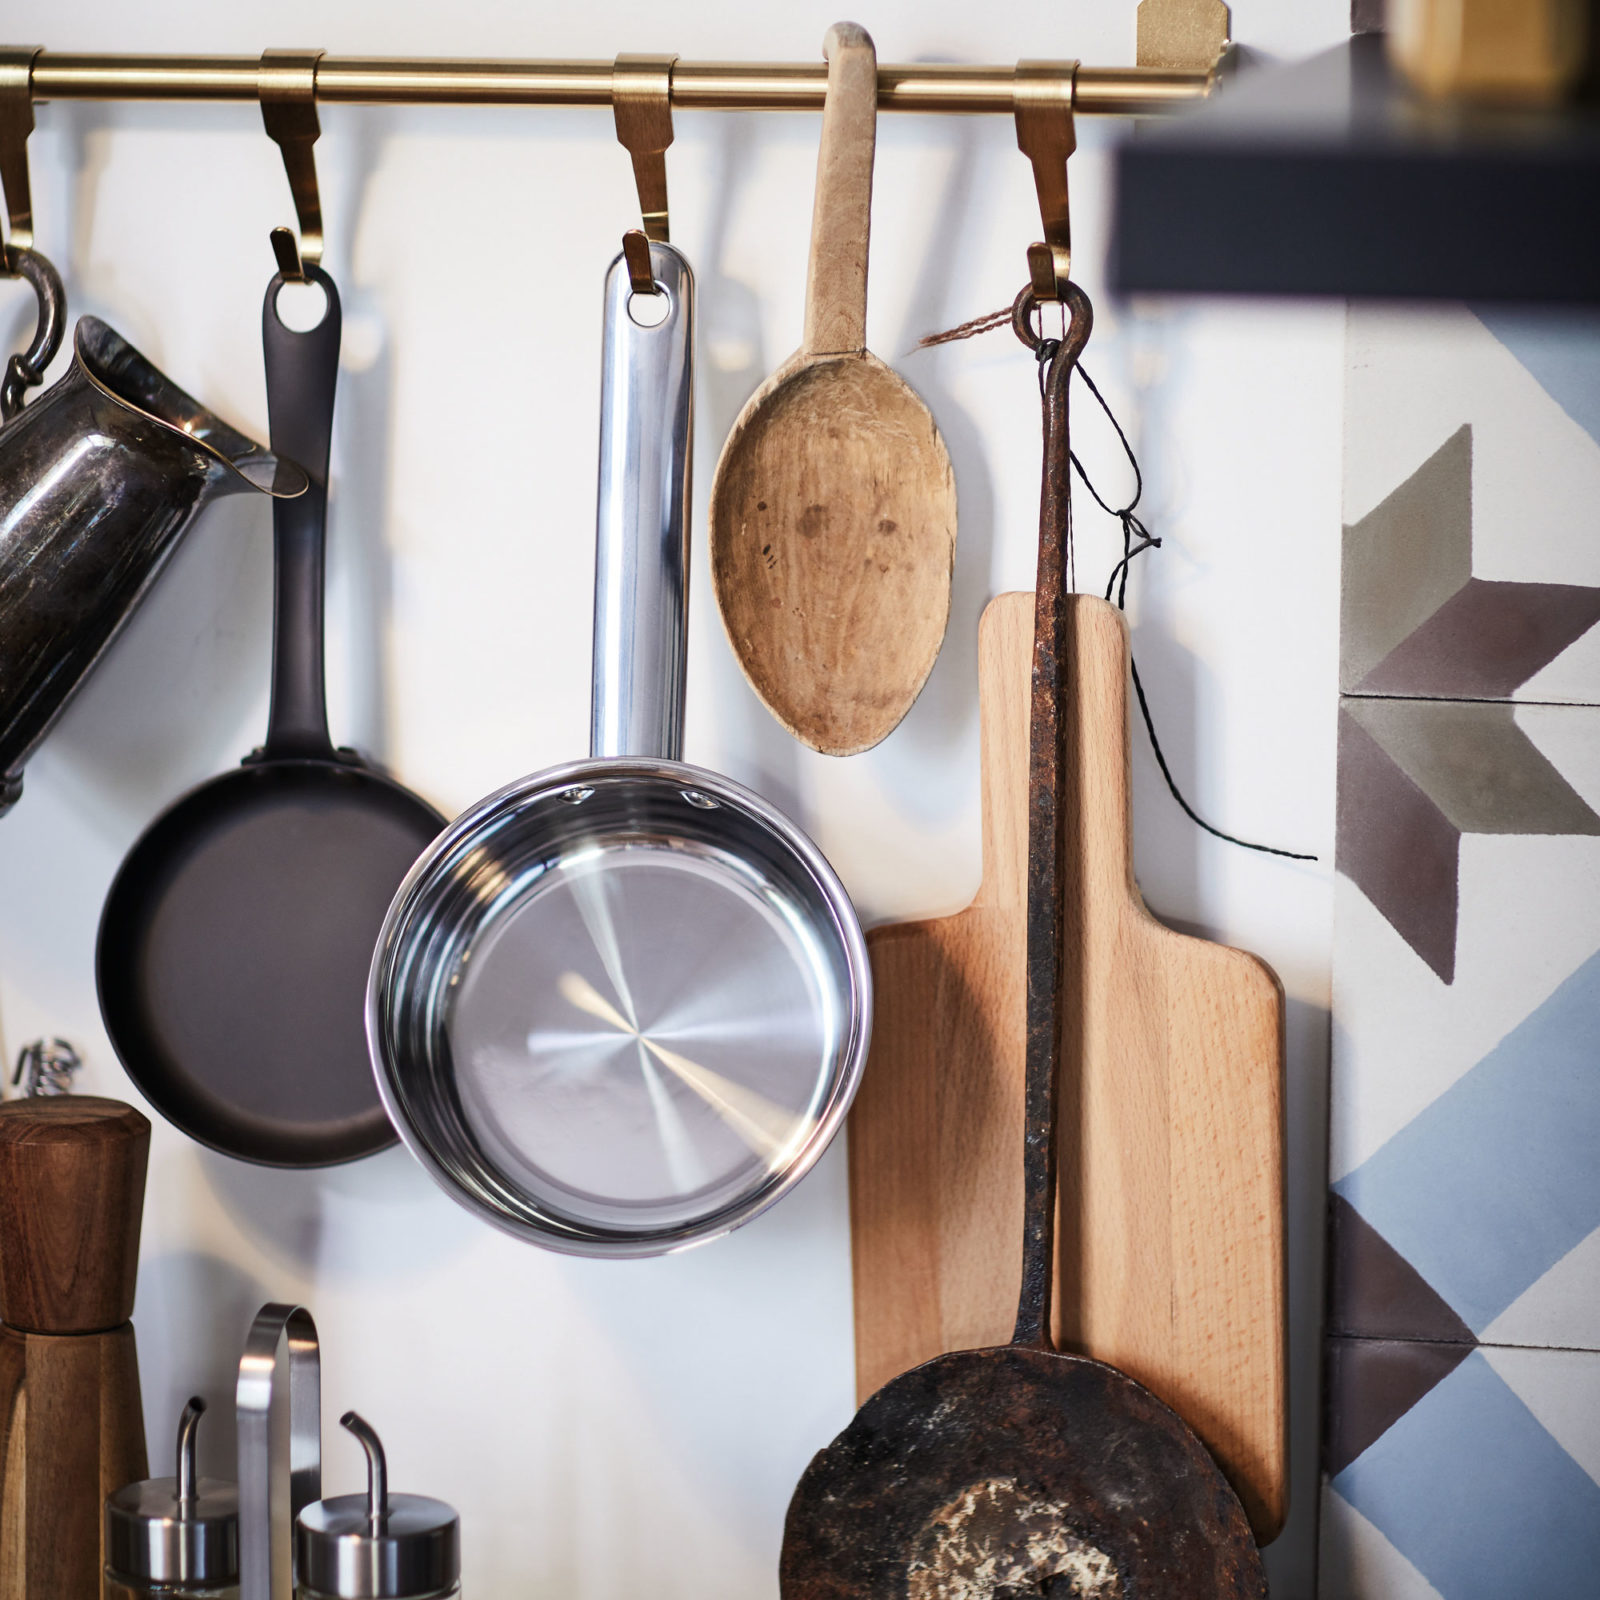 Close up of kitchen utensils, cutting board and pots hanging on hooks on the wall.